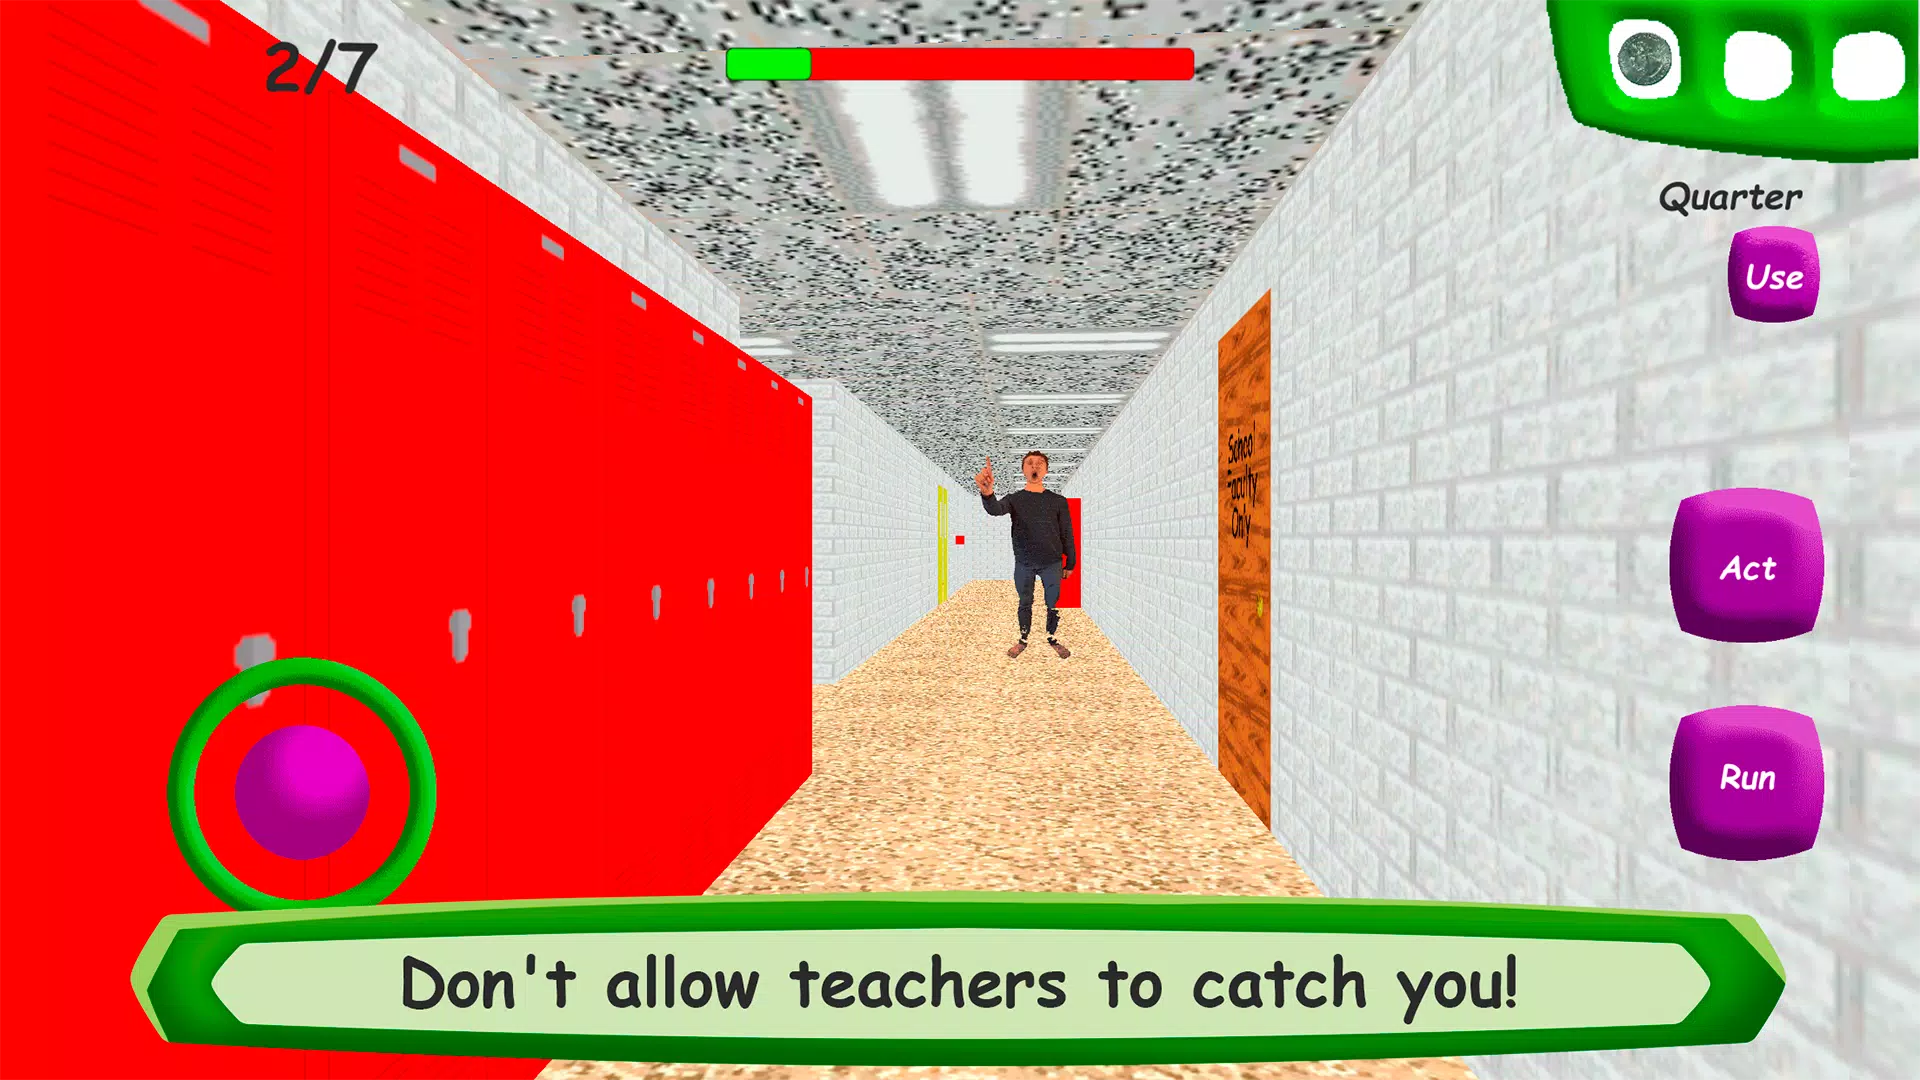 Baldi's Basics in Education and Learning APK per Android Download